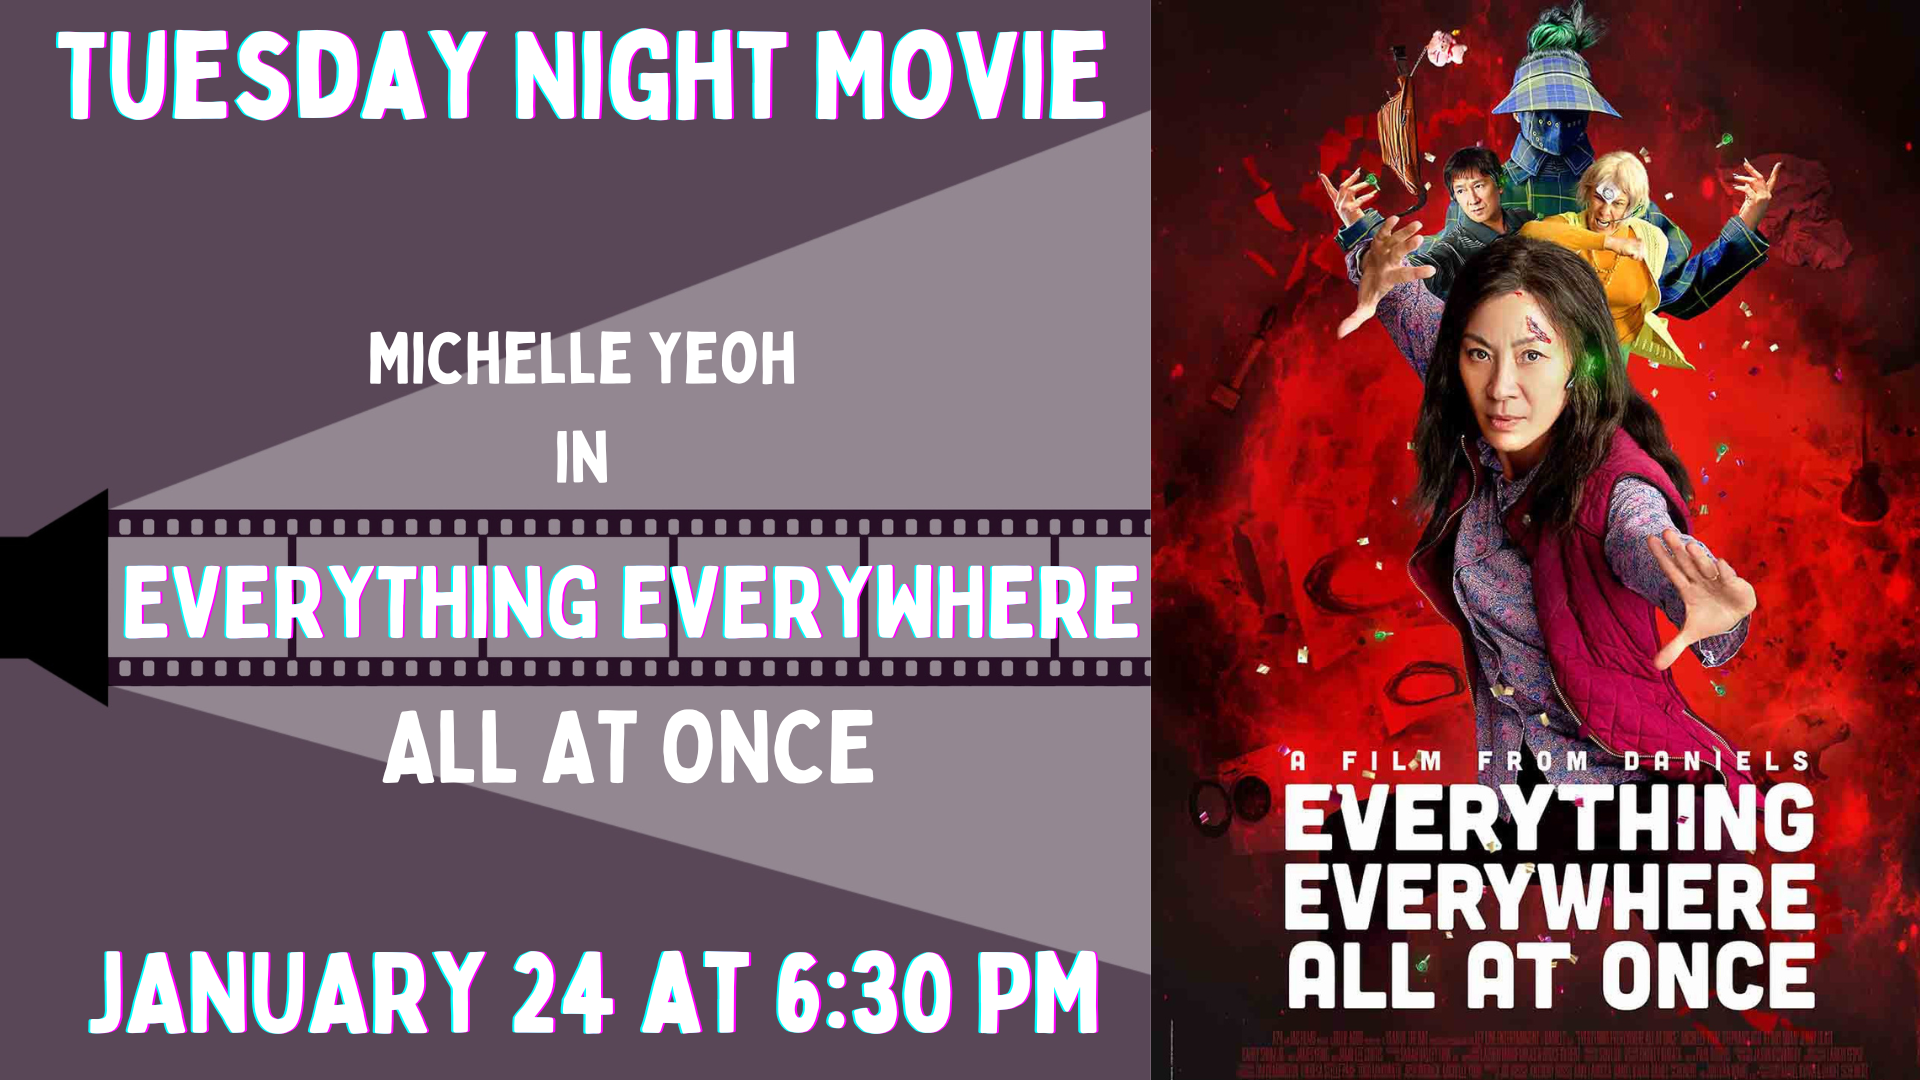 Banner advertising our screening of EVERYTHING EVERYWHERE ALL AT ONCE on January 24 at 6:30 PM